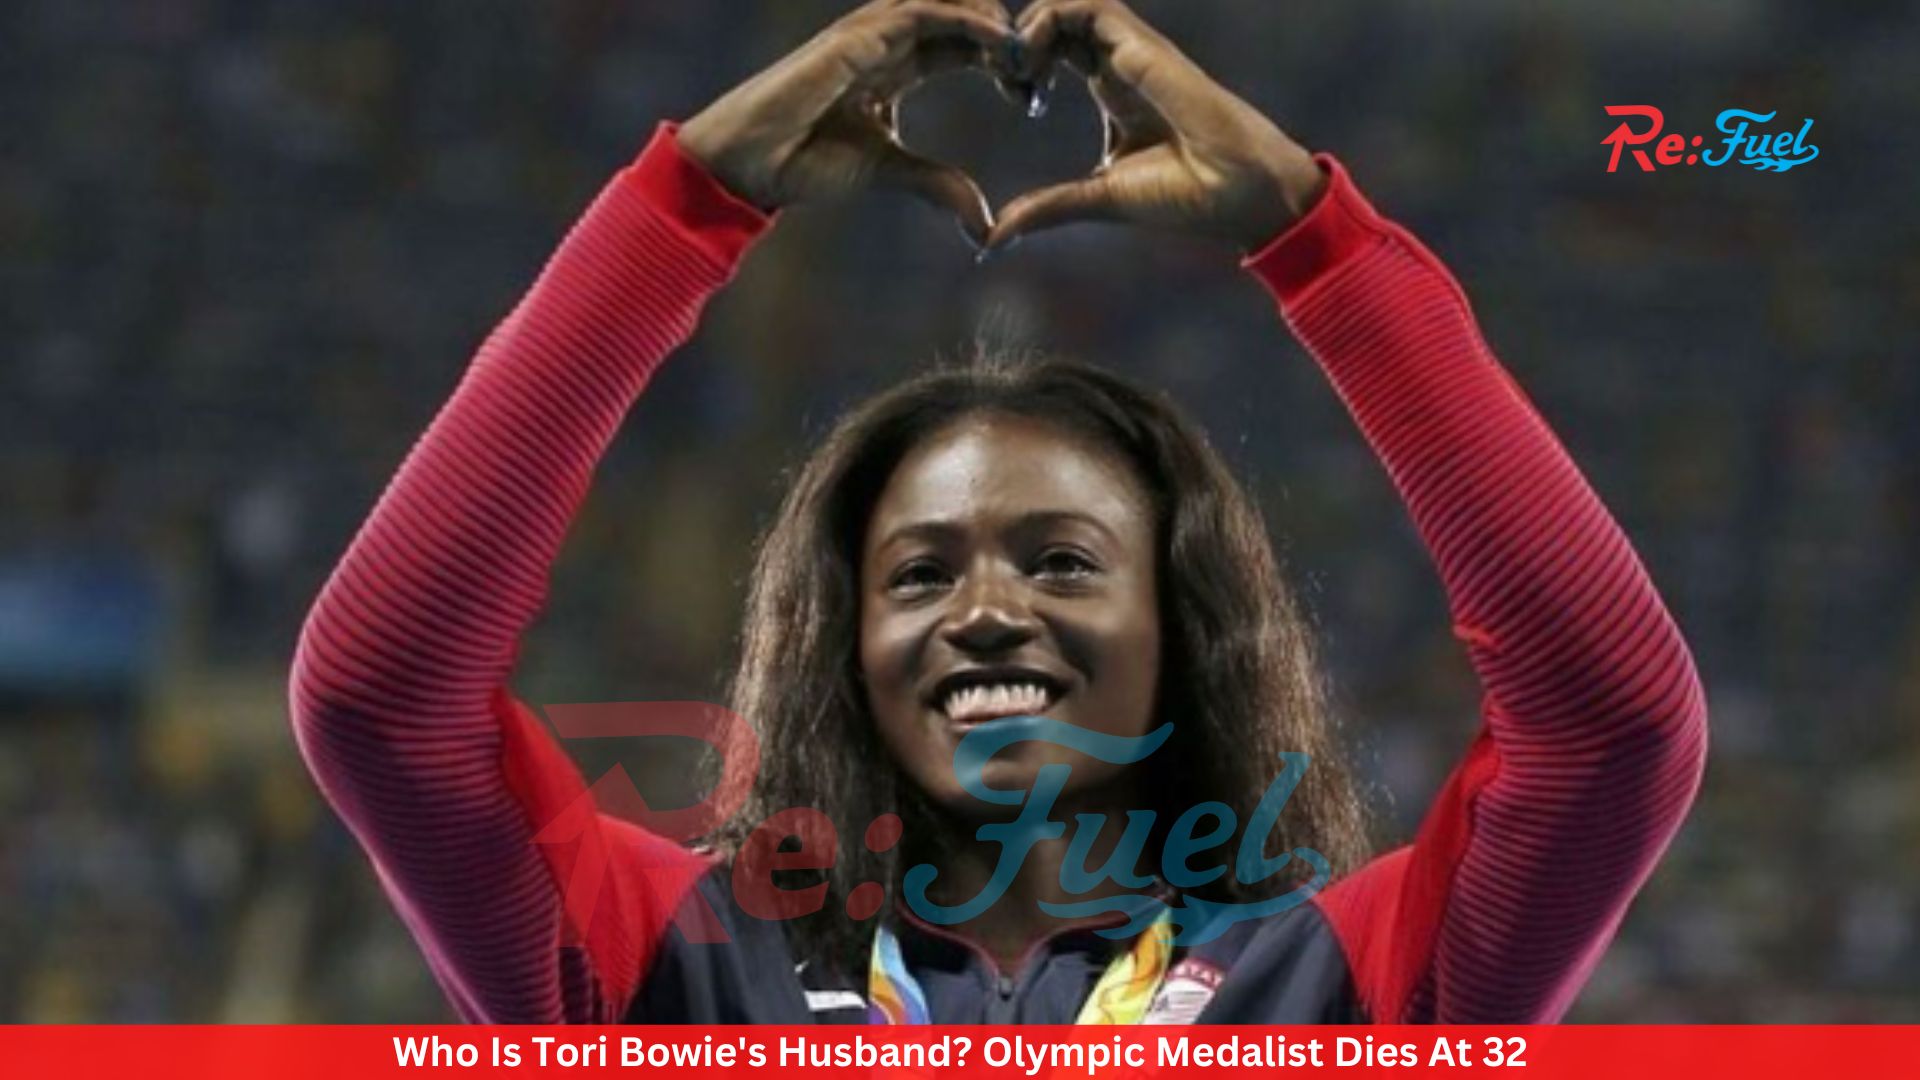 Who Is Tori Bowie's Husband? Olympic Medalist Dies At 32